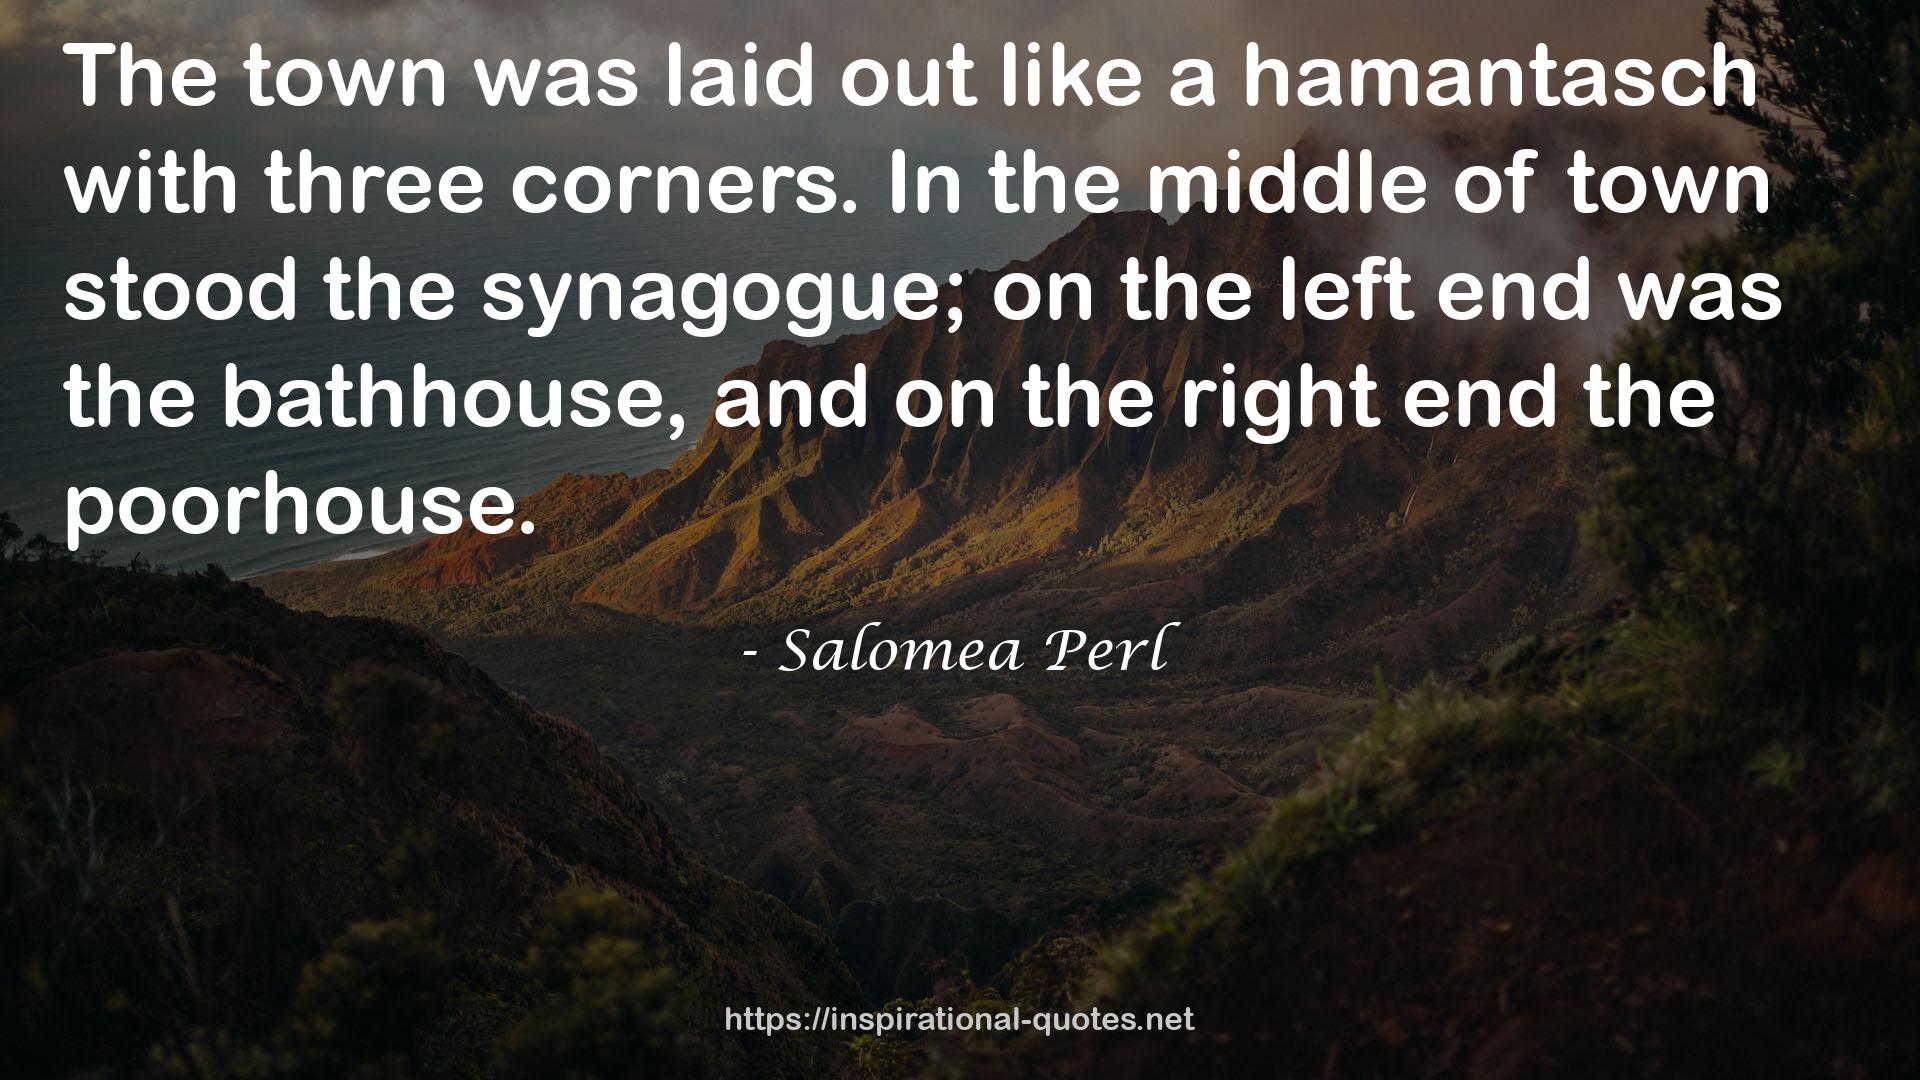 Salomea Perl QUOTES